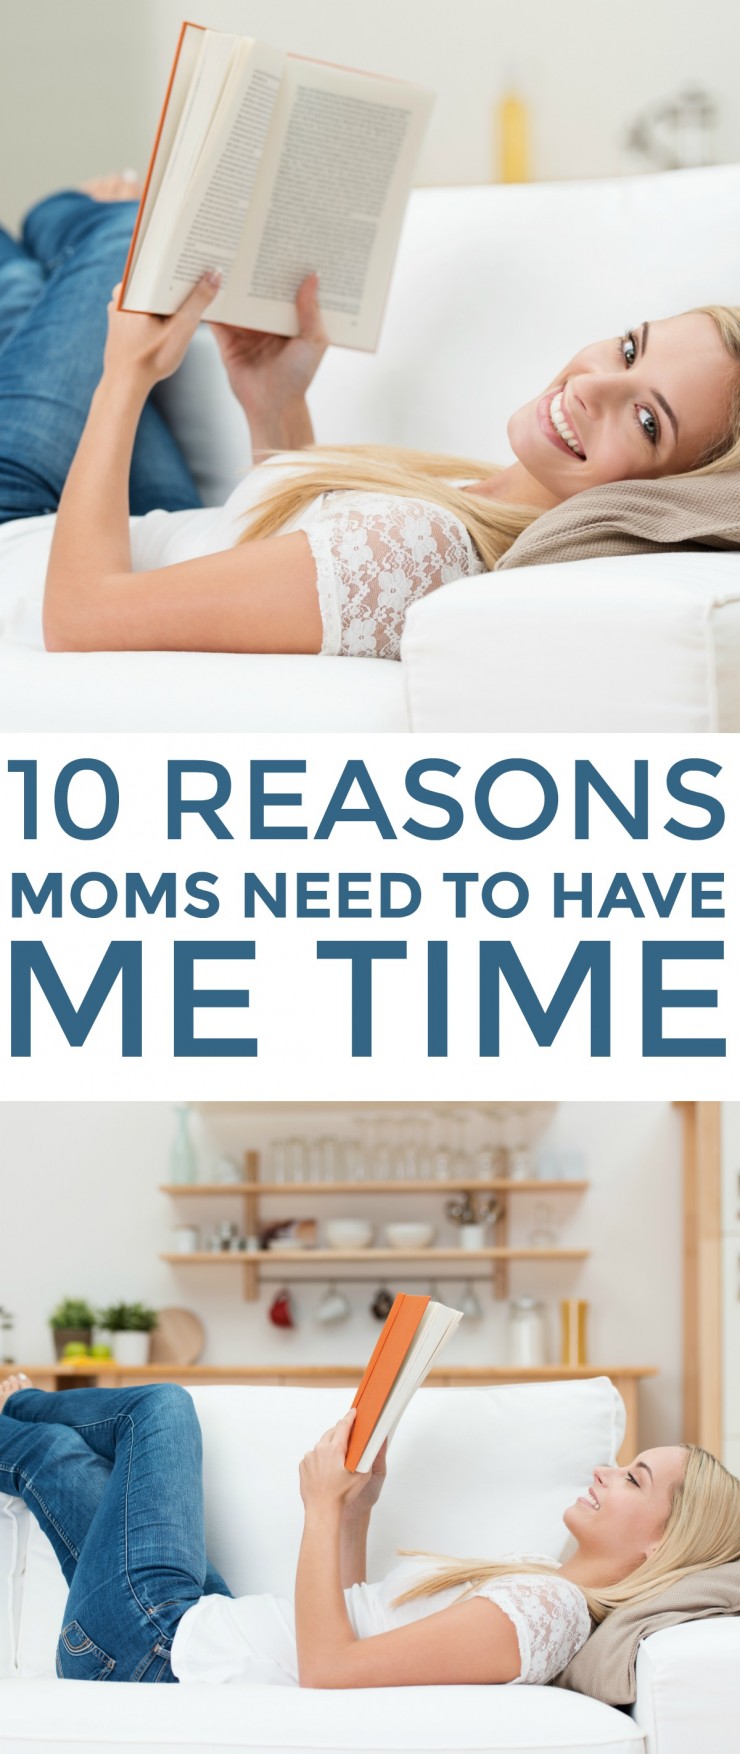 10 Reasons Moms Need to Have “Me Time” - we all need a break from parenting sometimes.